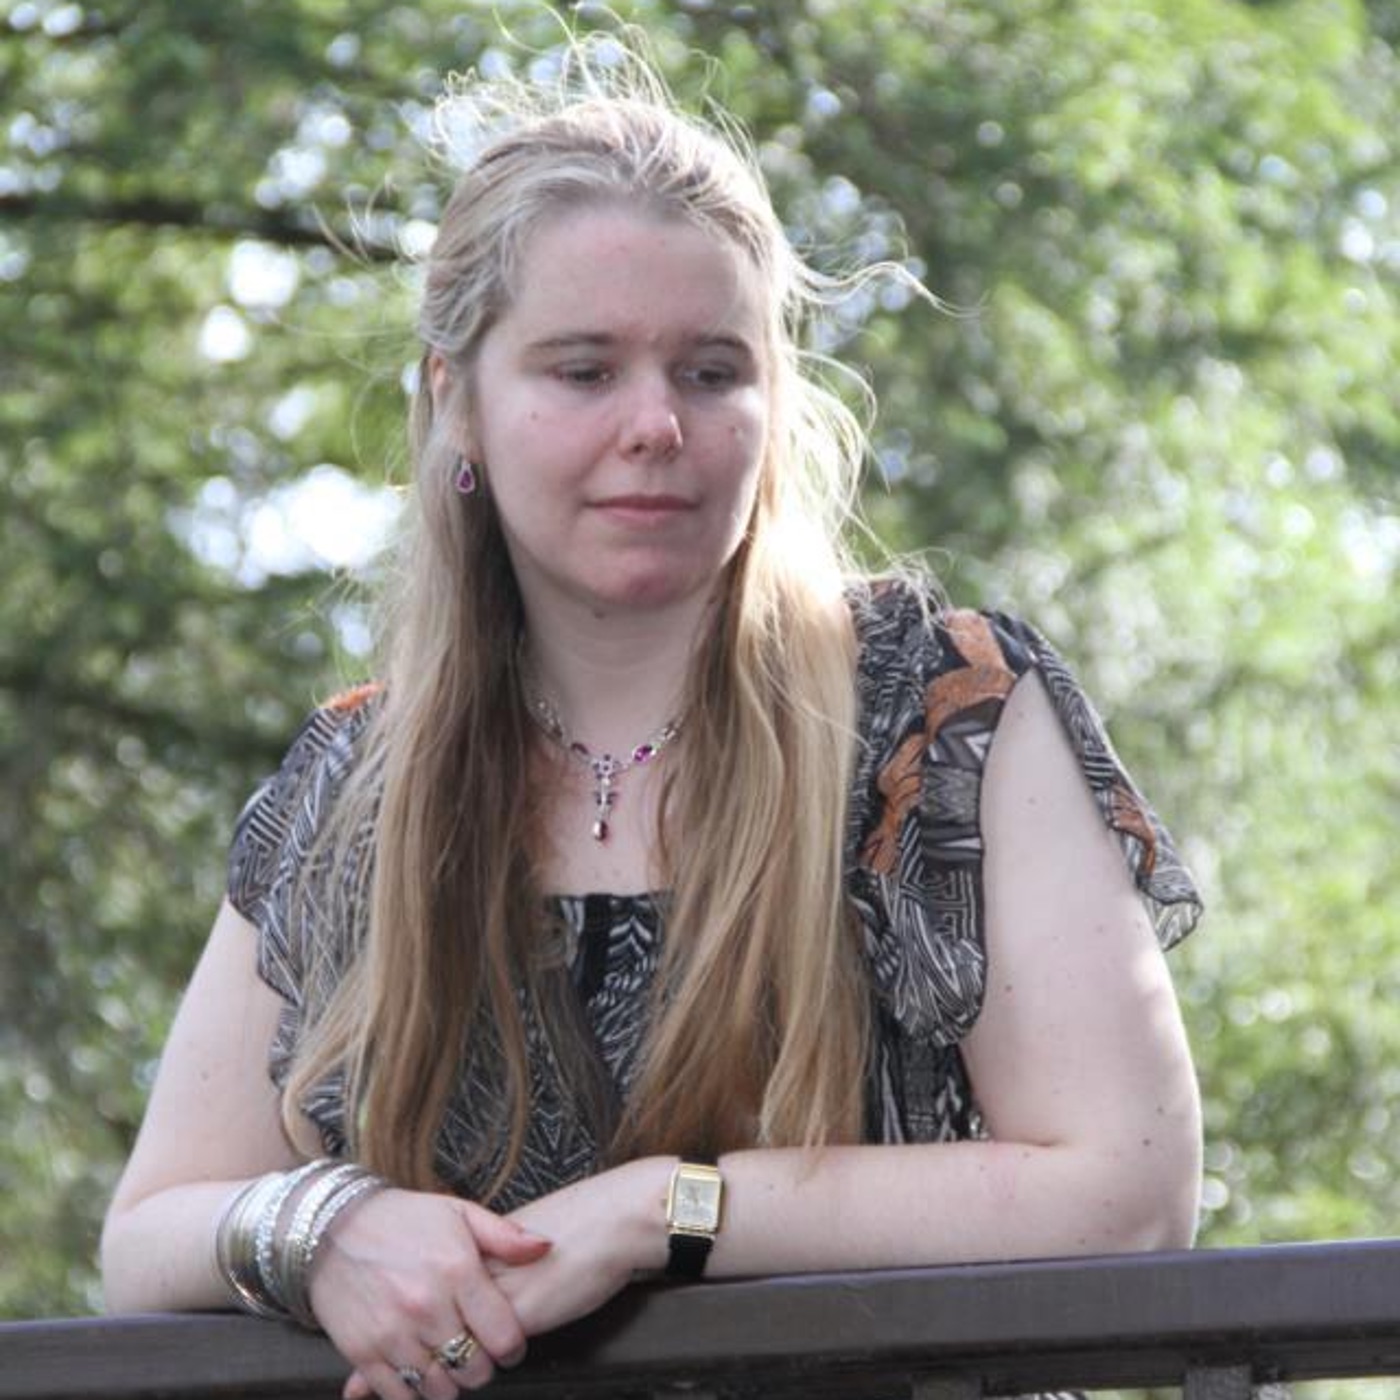 A photo of Kirsty where we see her upper body as she leans on the rail of a bridge. She has long blonde hair, she's wearing a short sleeved top, and she has pretty silver bracelets and a necklace.